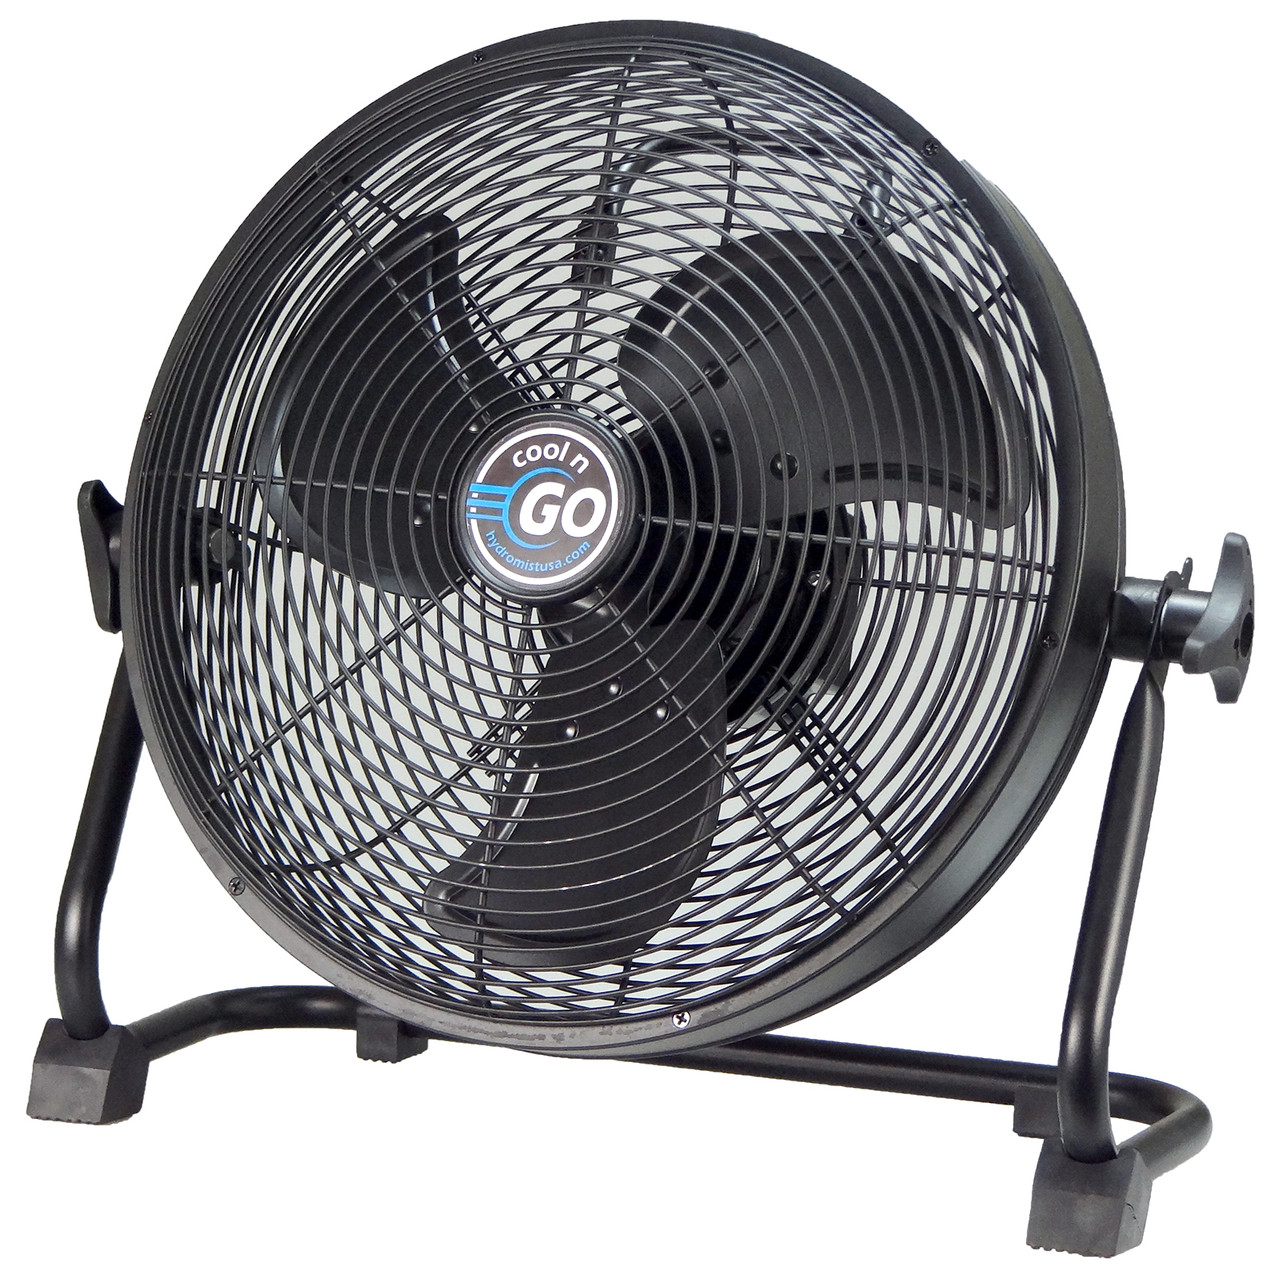 Cordless outdoor/indoor fan.  Perfect for Boats, RVs, Camping, Golfing and anywhere you need a cool breeze